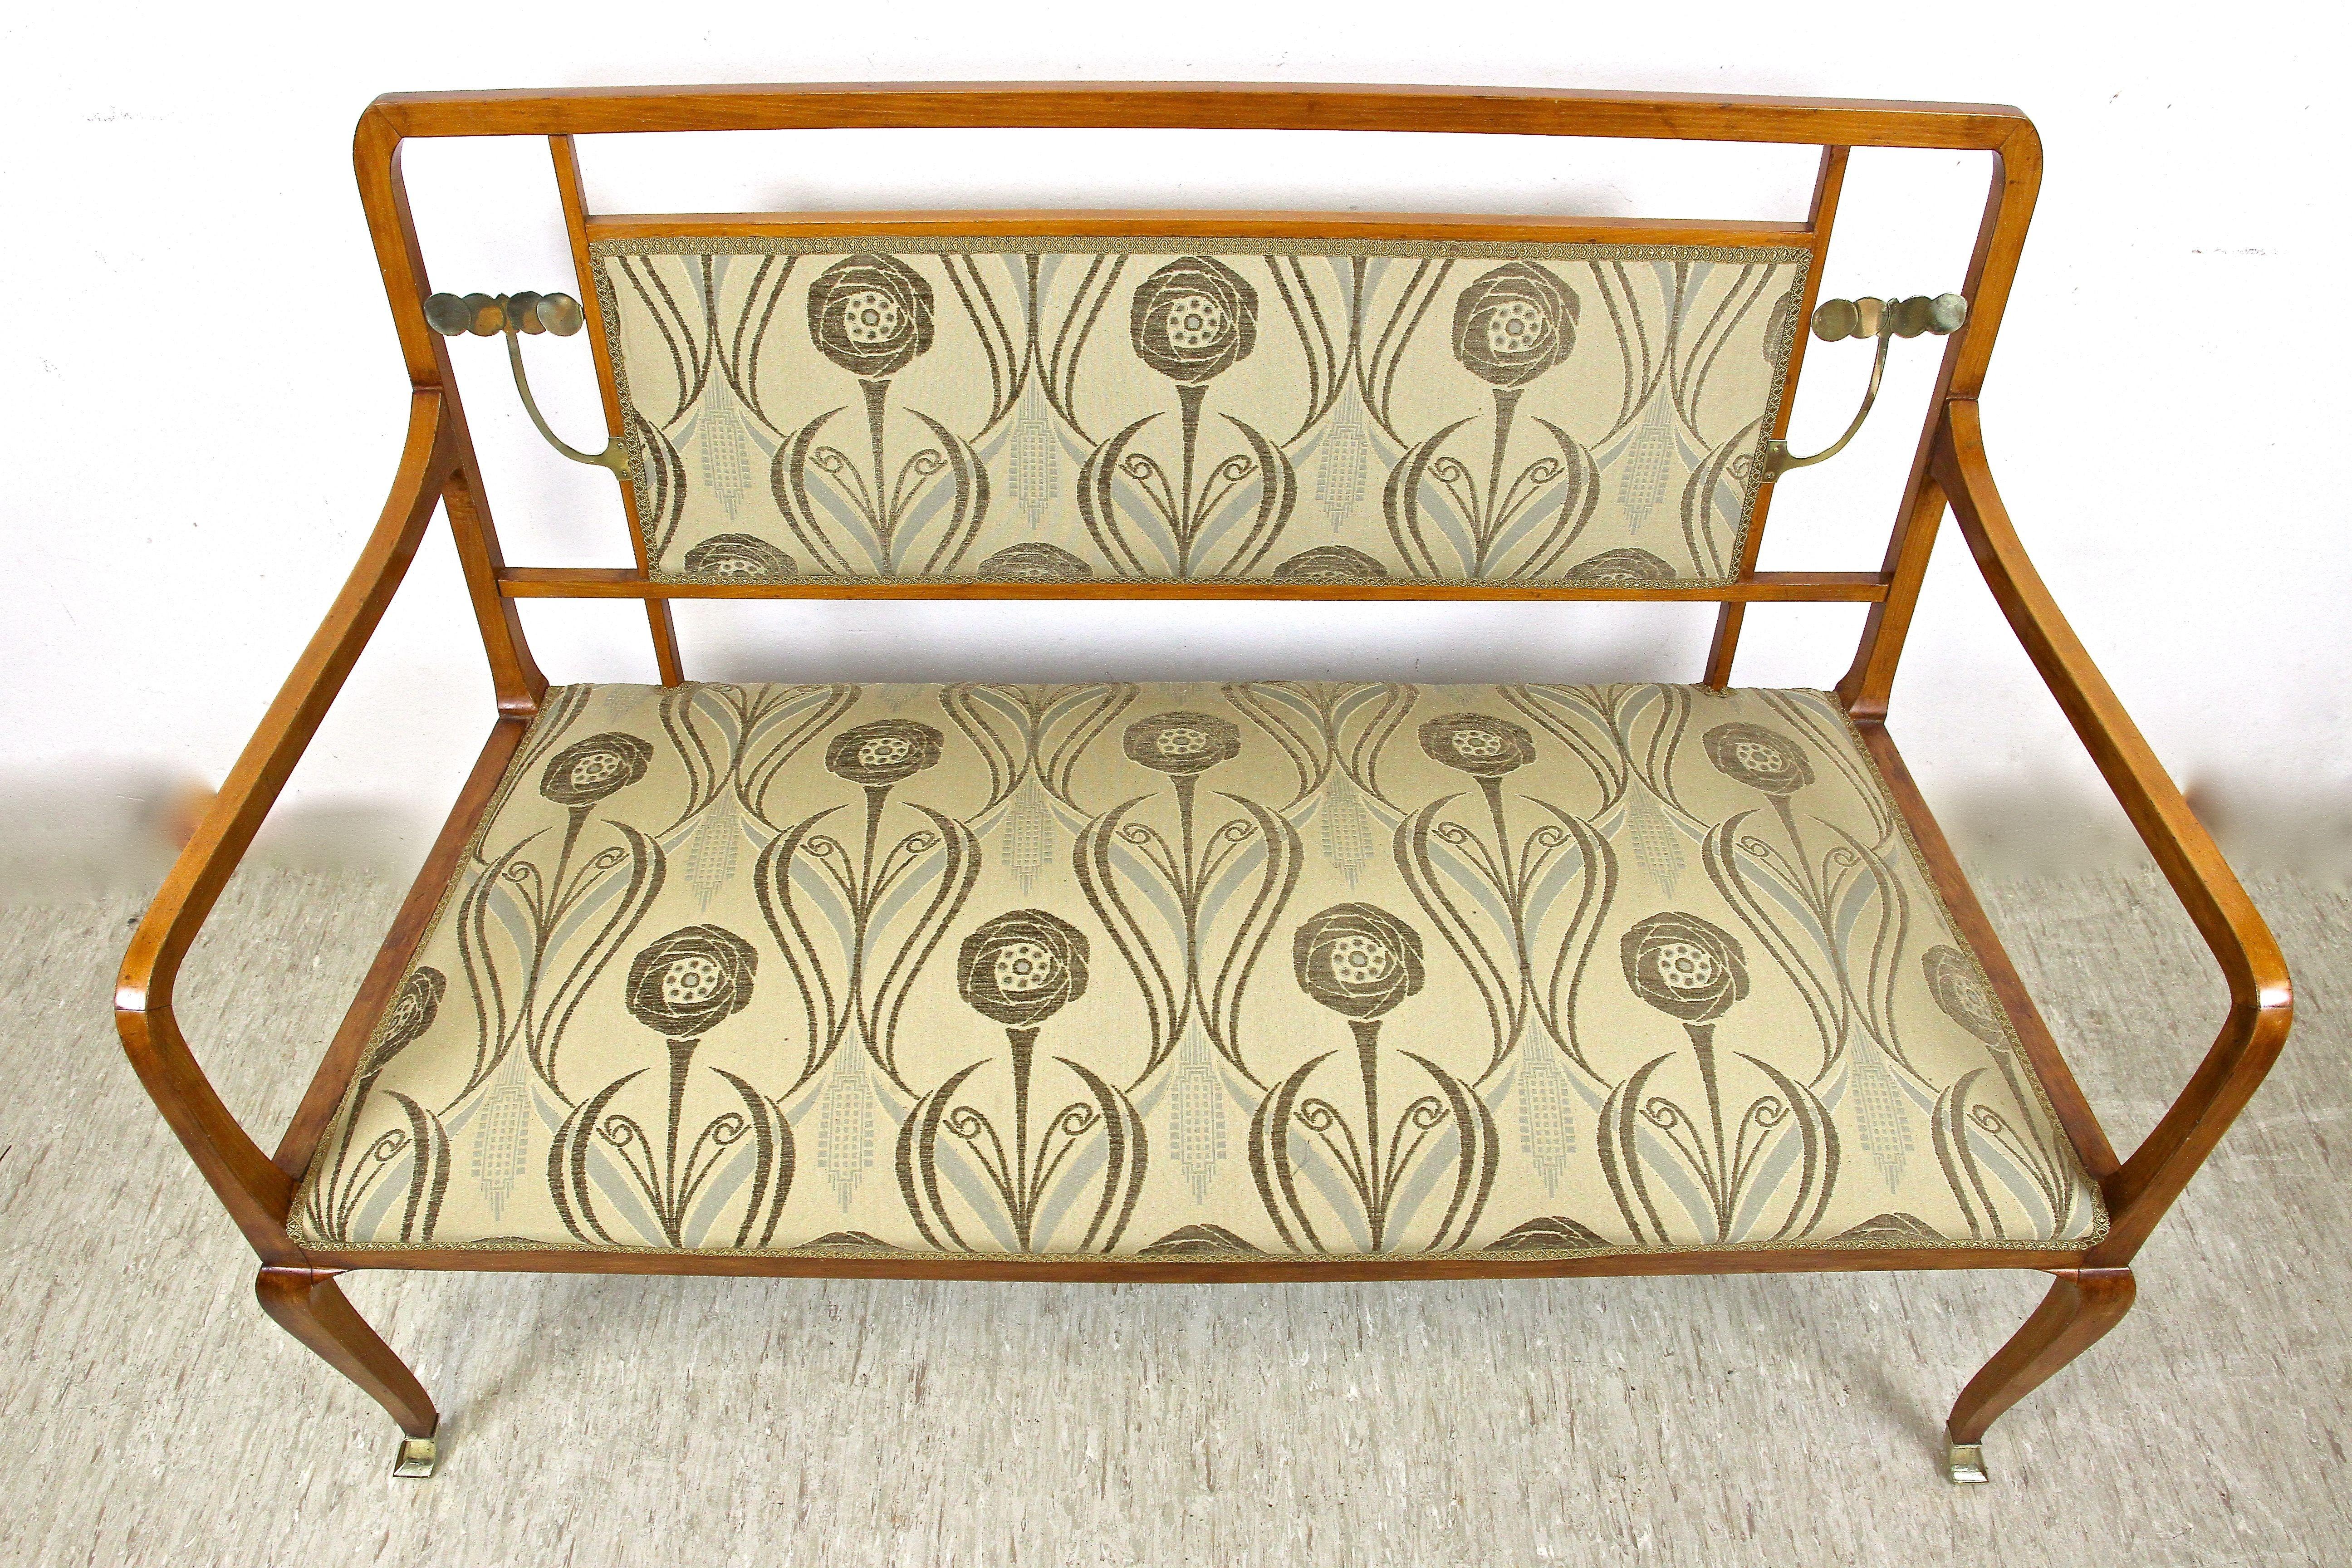 20th Century Art Nouveau Seating Set with Brass Elements + Table, Austria, circa 1910 For Sale